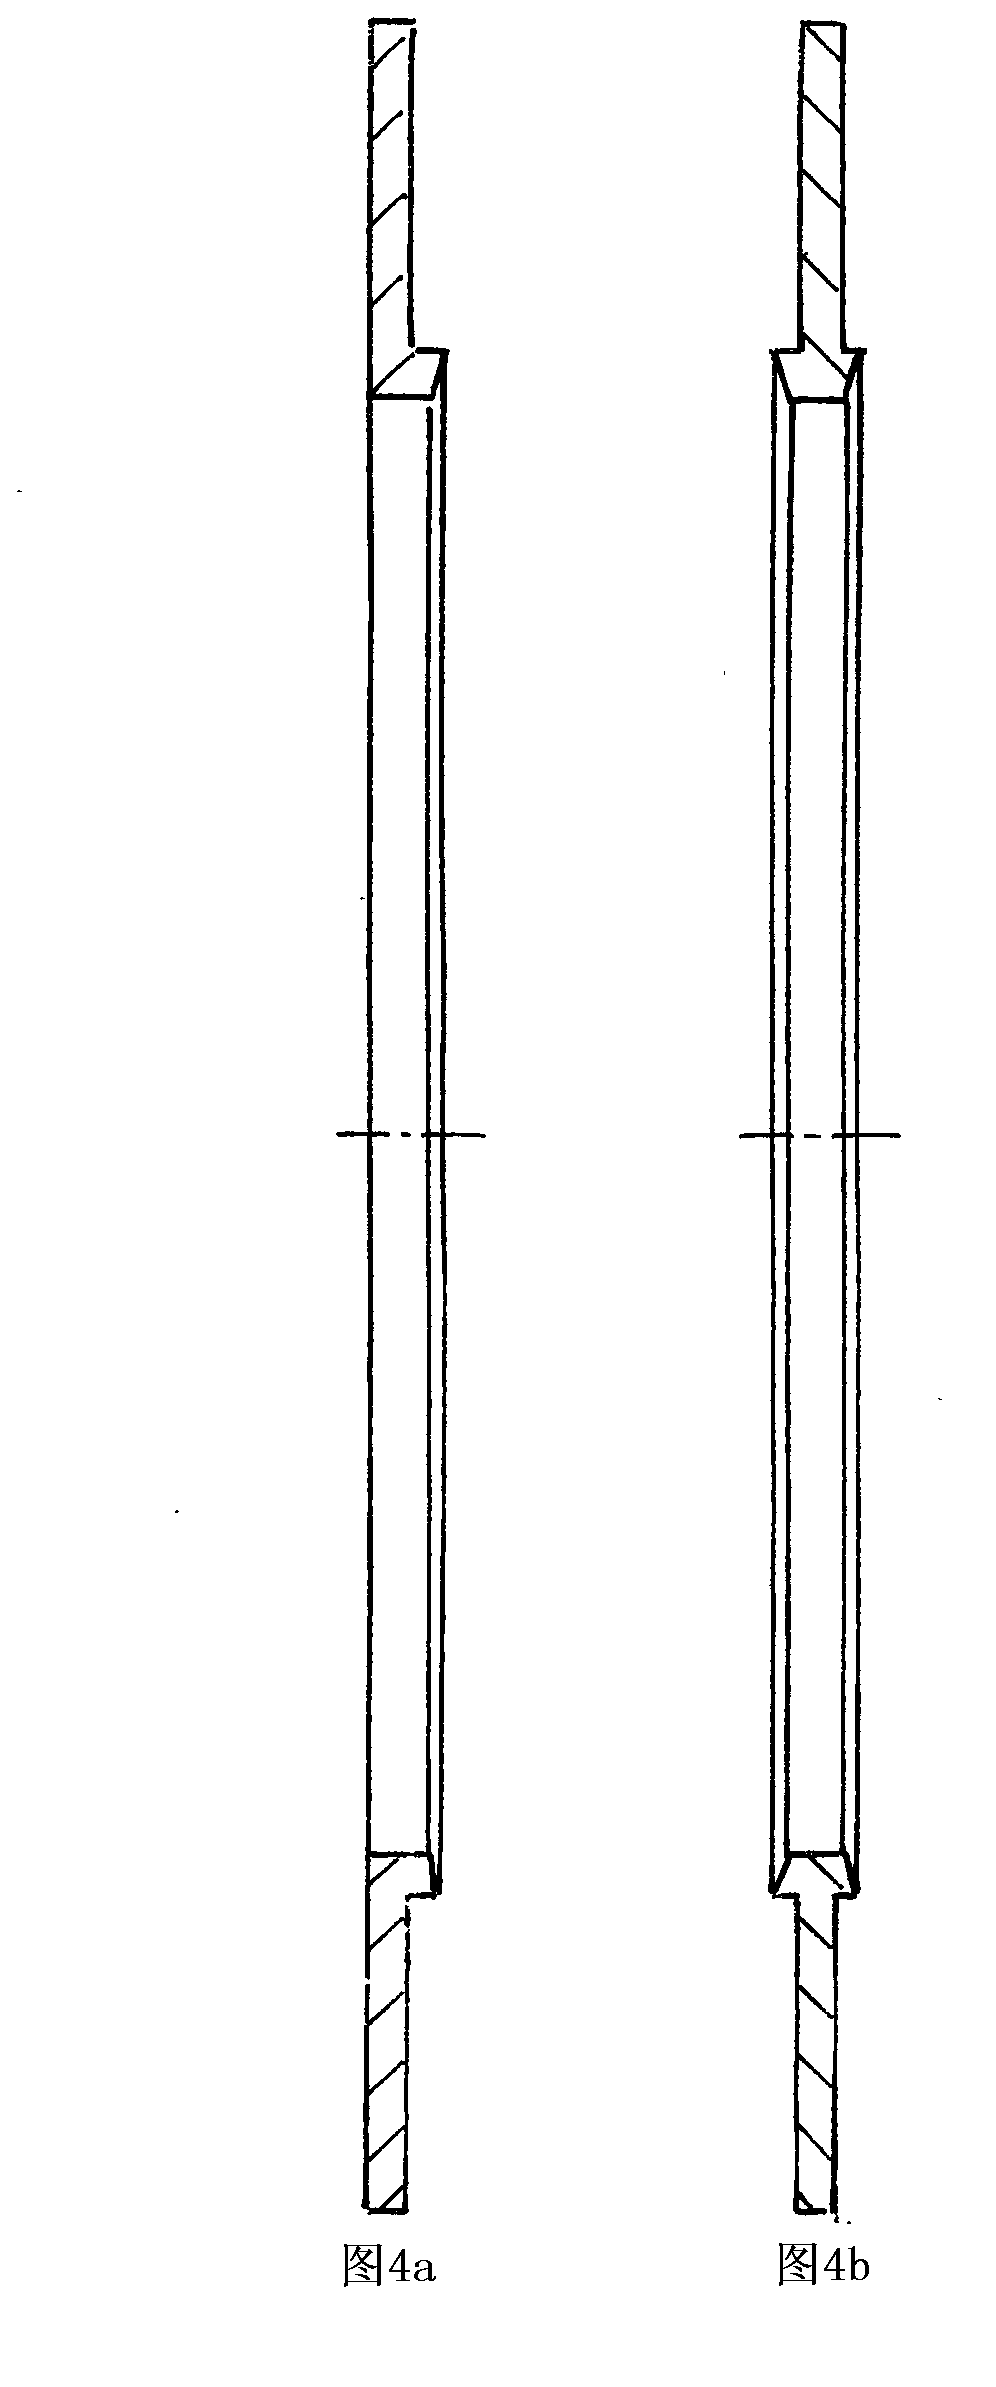 Constant-proportion variable-speed gathering transmission device